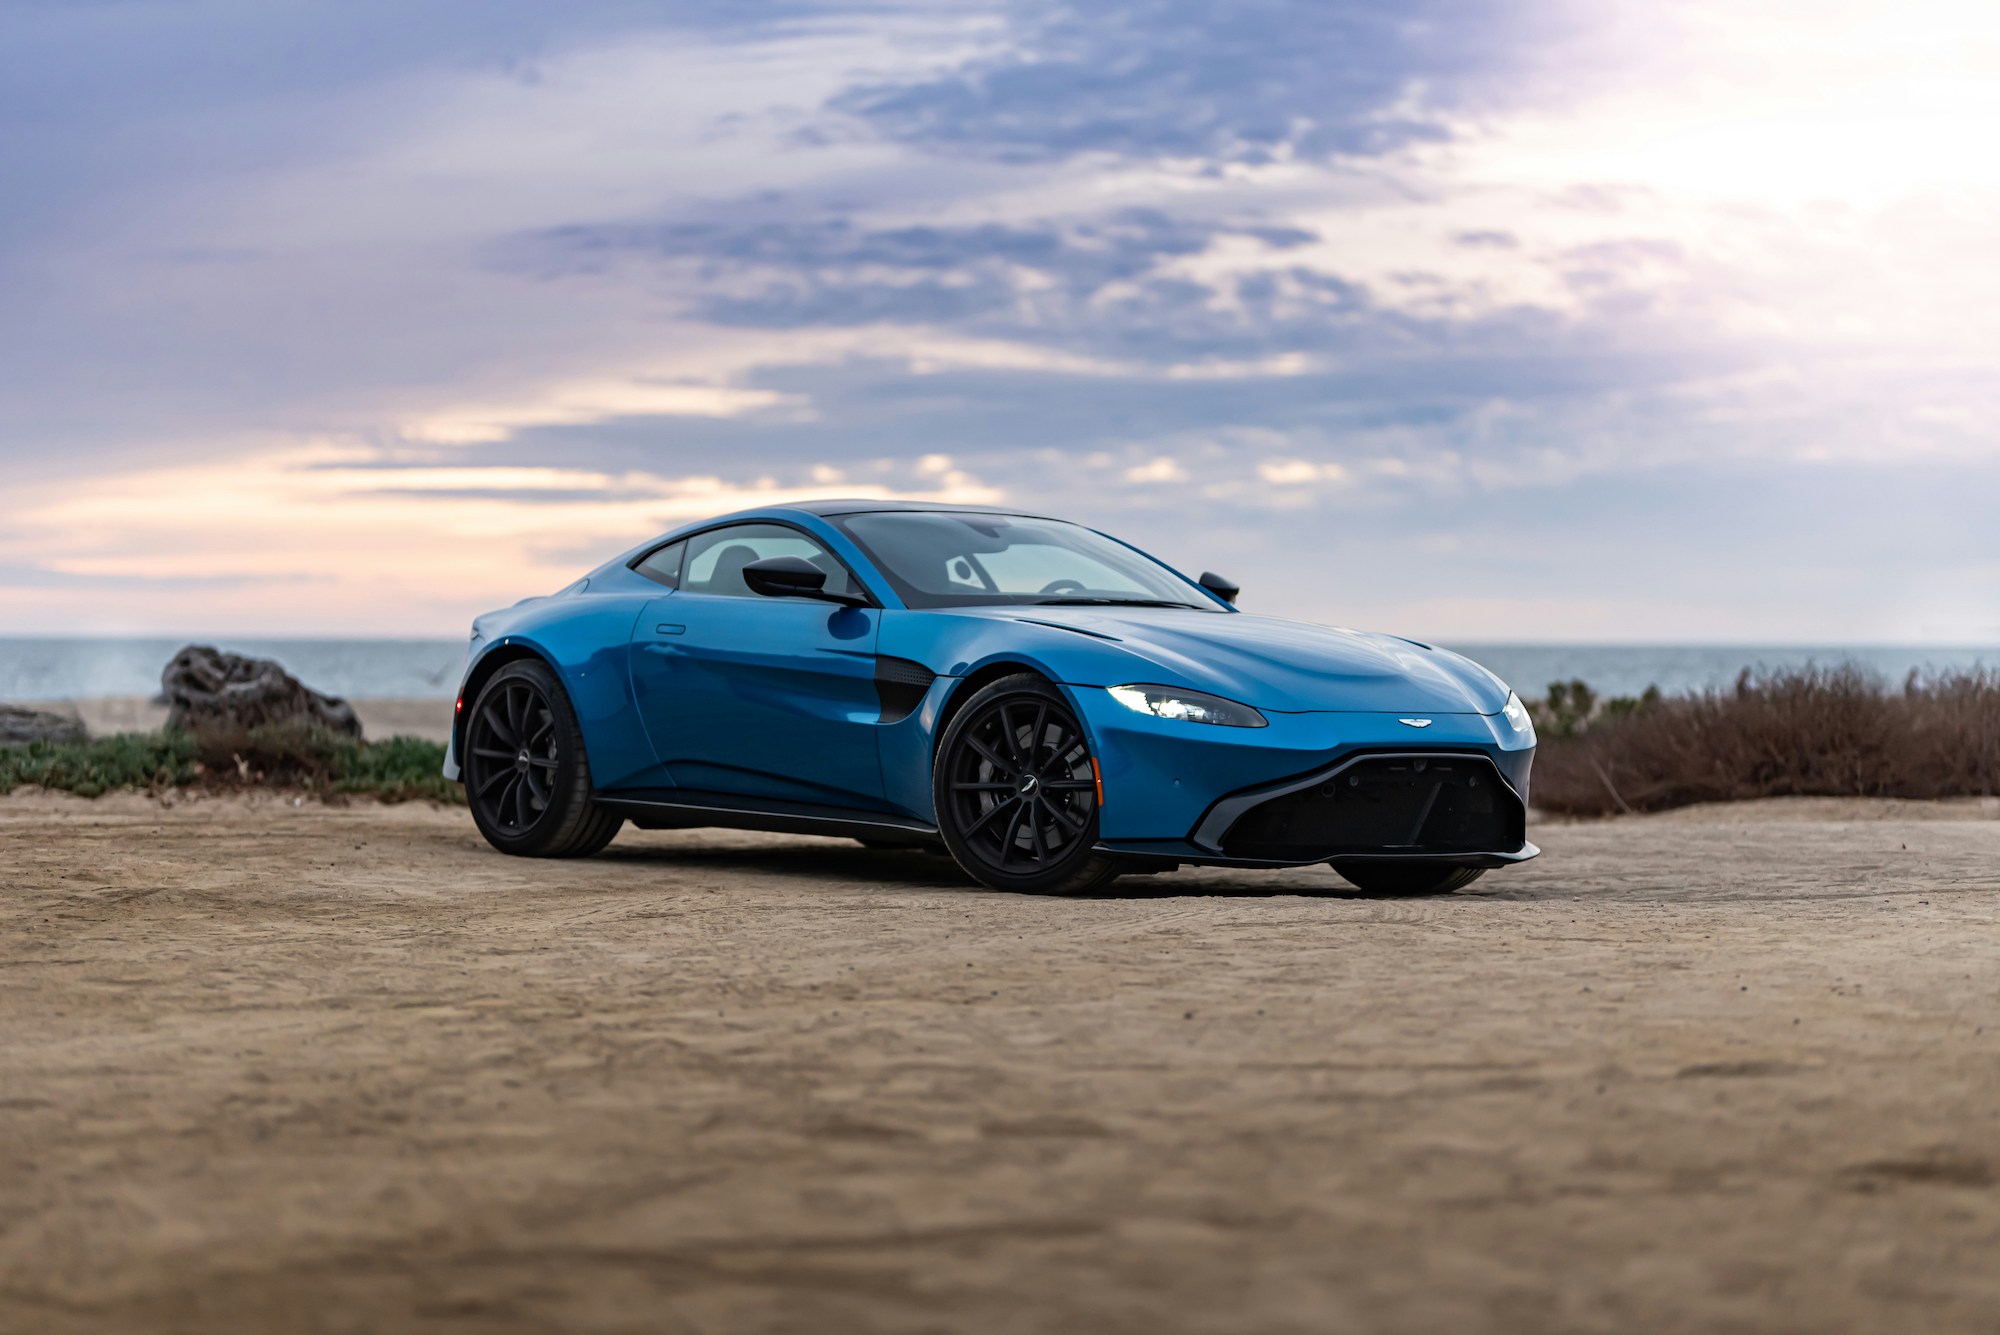 Aston Martin in a slump: the company's shares lost 22 % in a month